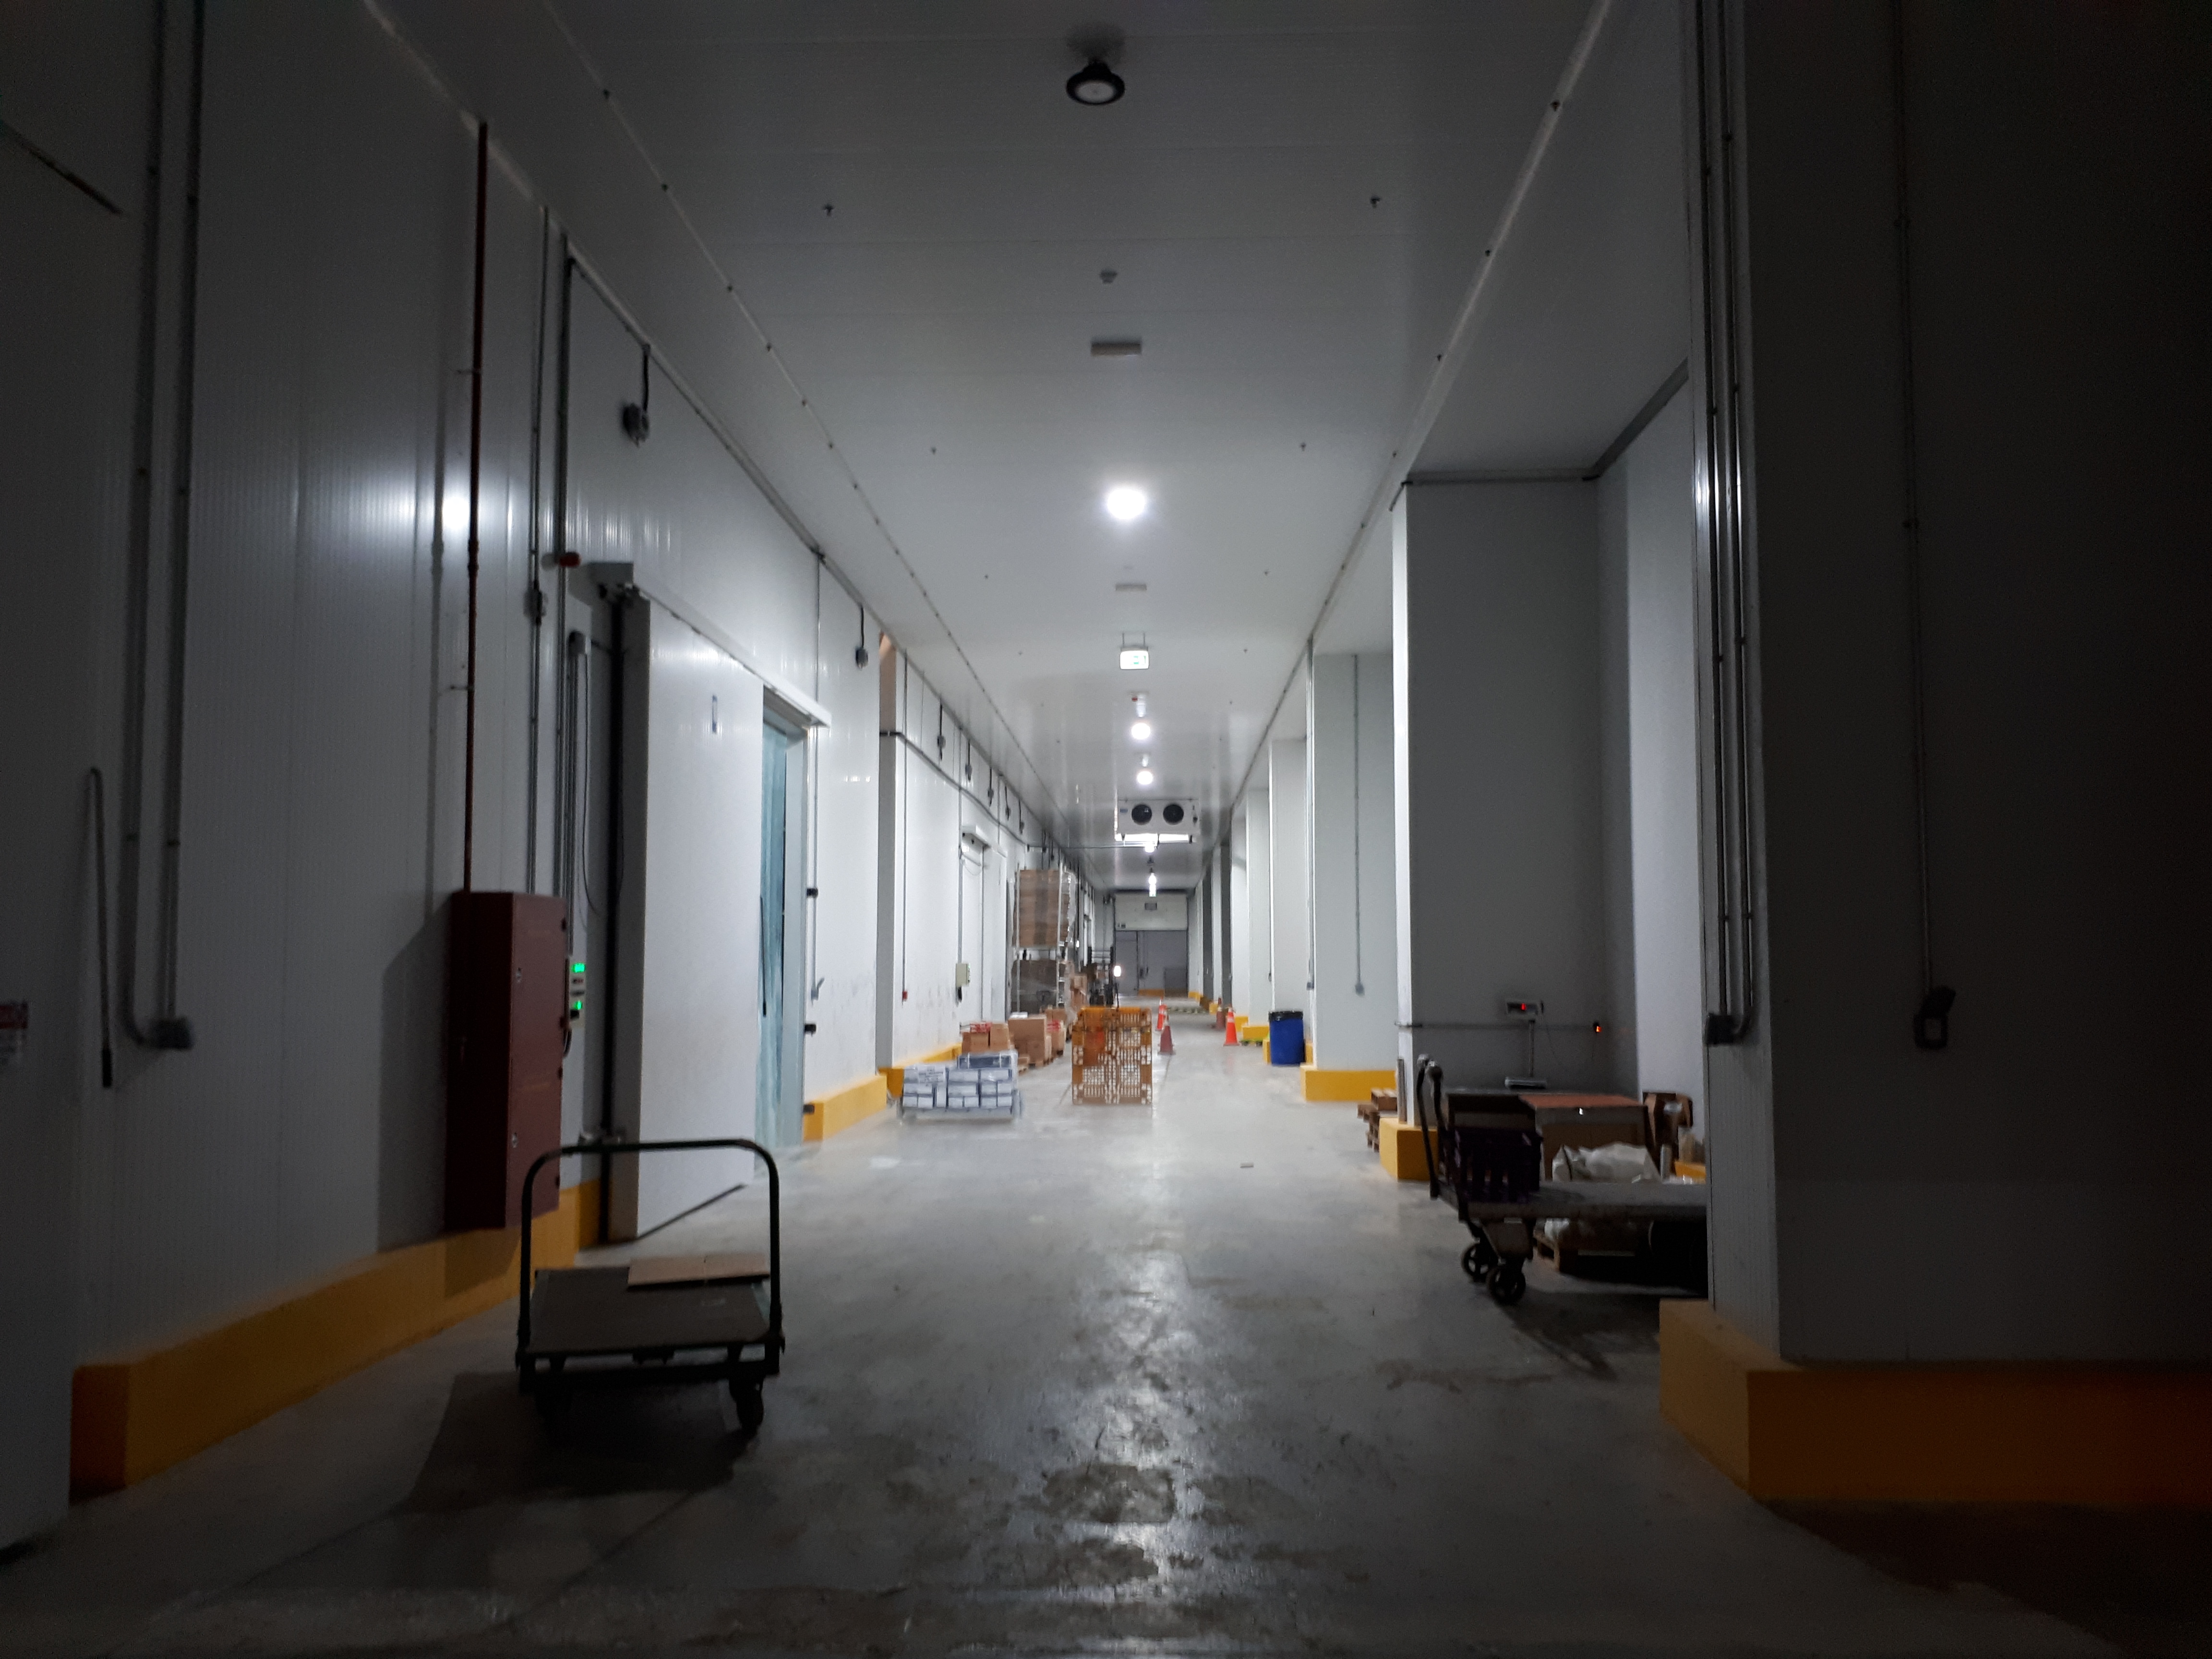 Project name: G2 International LLC, Technopark Dubai<br/>
Refrigeration contractor: Fanar al Khaleej Refrigeration<br/>
Execution: 2017-2018<br/>
Application: Logistic cold store, dry cold store, chiller and freezer cold rooms<br/>
Application with hot gas defrost + electrical in parallel<br/>
Cooling system description:<br/>
- Chilled receiving area: LU-VE Cubic 2# F50HC 1806 E 7 - 40,6kW  (10C_85%_EV-3) R404a<br/>
- 7 cold stores dual application Chiller/Freezer (various sizes): LU-VE Cubic 15# F50HC 1808 E 7 - 21,4kW (-20C_85%_EV-27C) R404a<br/>
- 2 cold stores dual application Chiller/Freezer (various sizes): LU-VE Cubic 4# F50HC 1806 E 7 - 17,4kW (-20C_85%_EV-27C) R404a<br/>
- 1 cold stores dual application Chiller/Freezer (various sizes): LU-VE Cubic 1# F45HC 1320 E 7 - 30,3kW (-20C_85%_EV-27C) R404a<br/>
- Corridor: LU-VE Cubic 2# F50HC 1706 E 6 - 40,6kW  (5_85%_EV-3) R404a<br/>
- Dry storage area (1800sqm): LU-VE Cubic 3# F71HC 4208 N 6 – 65,8kW (22C_65%_EV-27C) R134a<br/>
- Technical Store: LU-VE Cubic 1# F45HC 1112 N 4 – 28,9kW (22C_65%_EV-27C) R134a<br/>
- Plant room: LU-VE Cubic 1# F35HC 261 N 6 – 19,4kW (25C_65%_EV-27C) R134a<br/>
Rack System:<br/>
- 1# Profroid 200HP Rack for LT application R404a<br/>
- 1# Profroid 120HP Rack for MT application R134a
